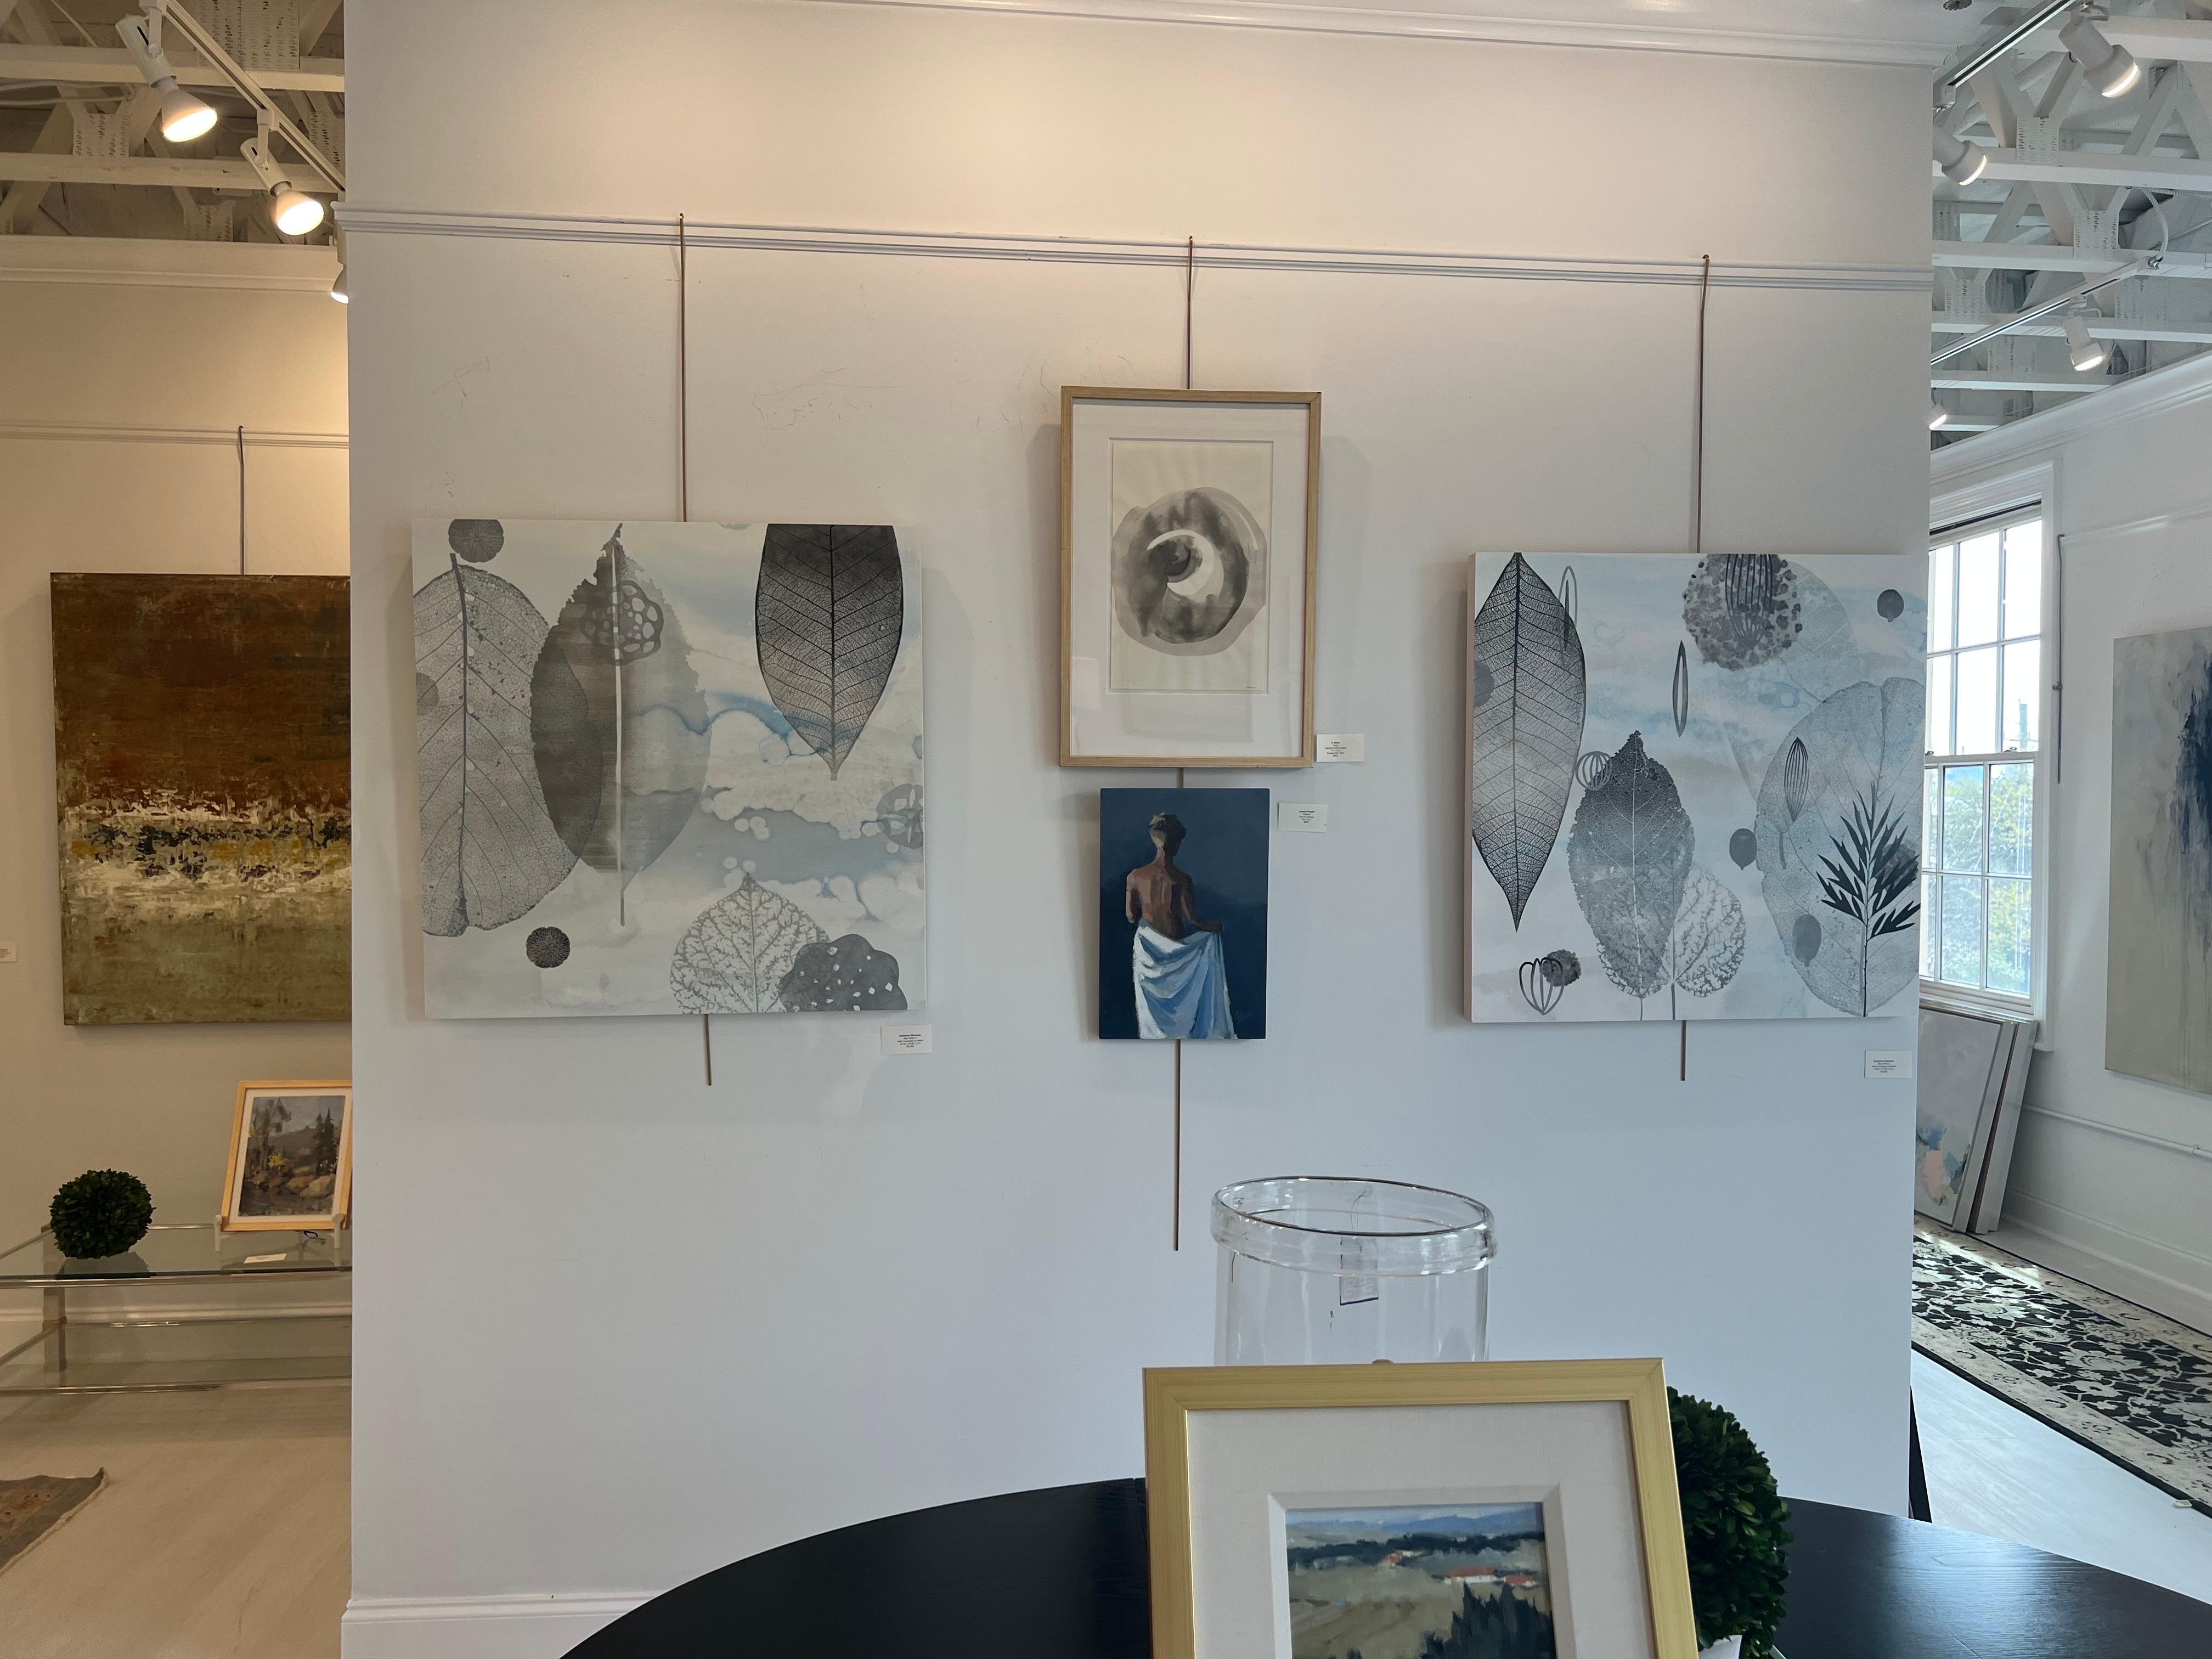 Katherine’s delicate and evocative monotypes portray nature’s flora in all its glory, from the most organic trees and branches to airily etched florals.  They are the result of a perfect (and complicated!) marriage of technical expertise and